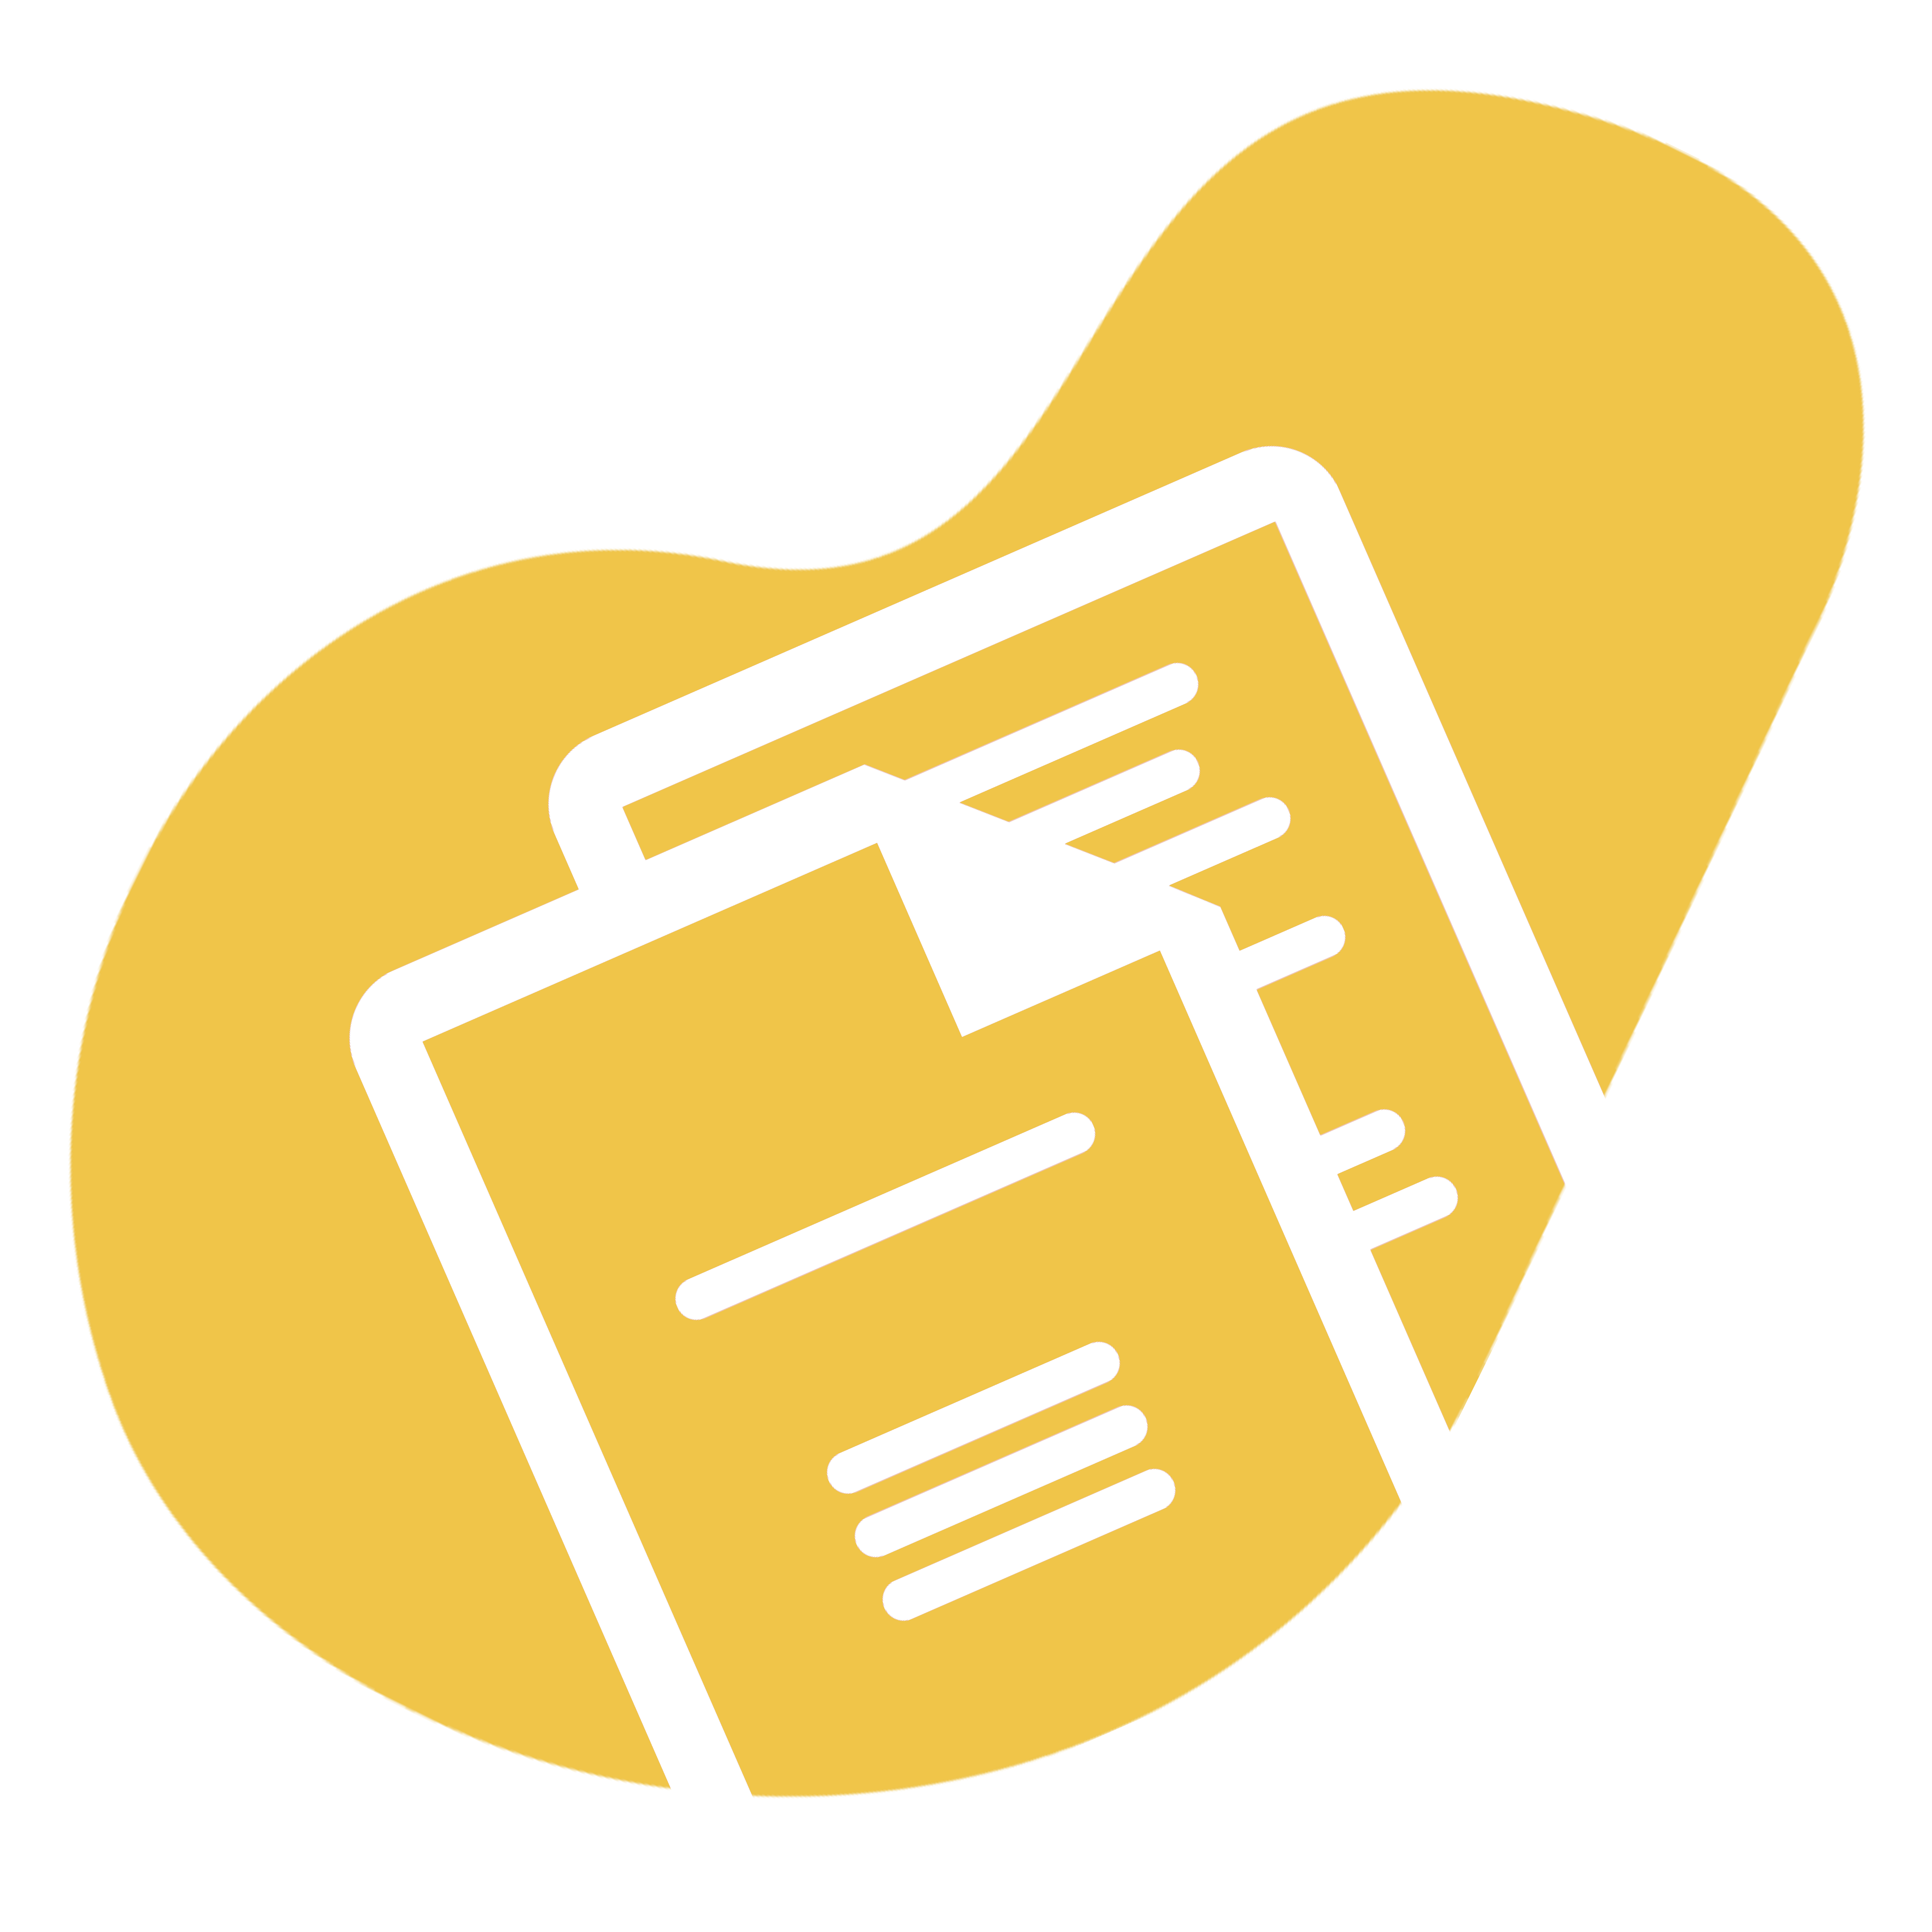 A yellow blob with an overlay of a document icon in white